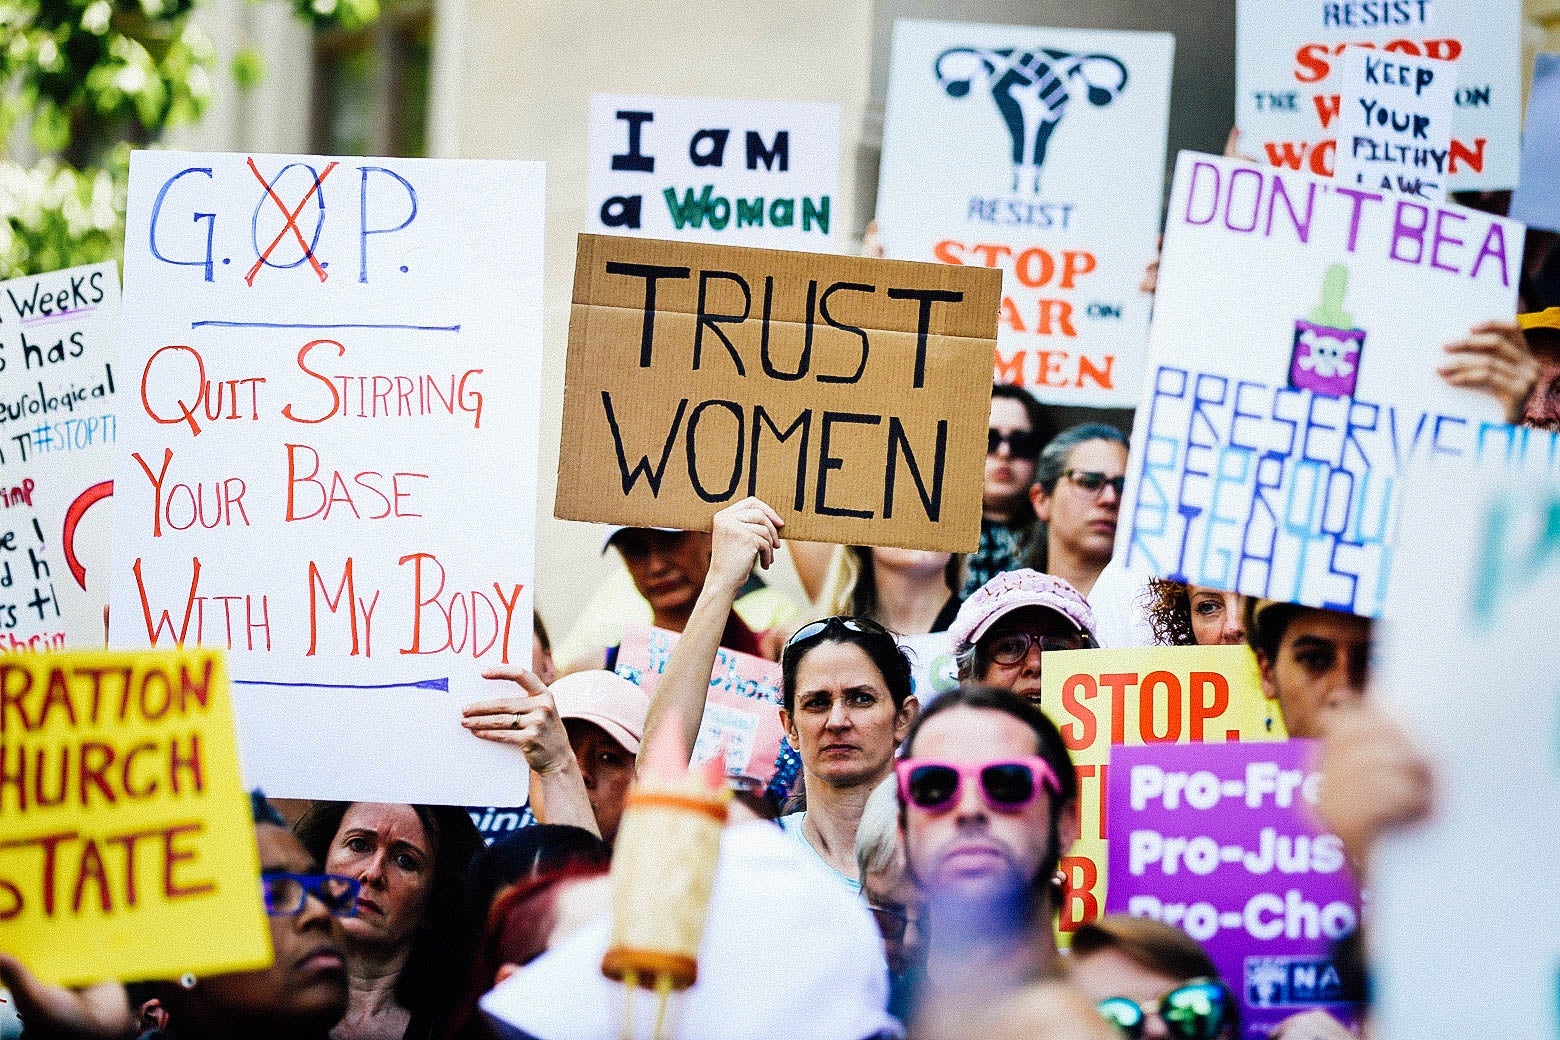 Protesters hold signs opposing the abortion ban: "TRUST WOMEN," "GOP QUIT STIRRING YOUR BASE WITH MY BODY," and more.